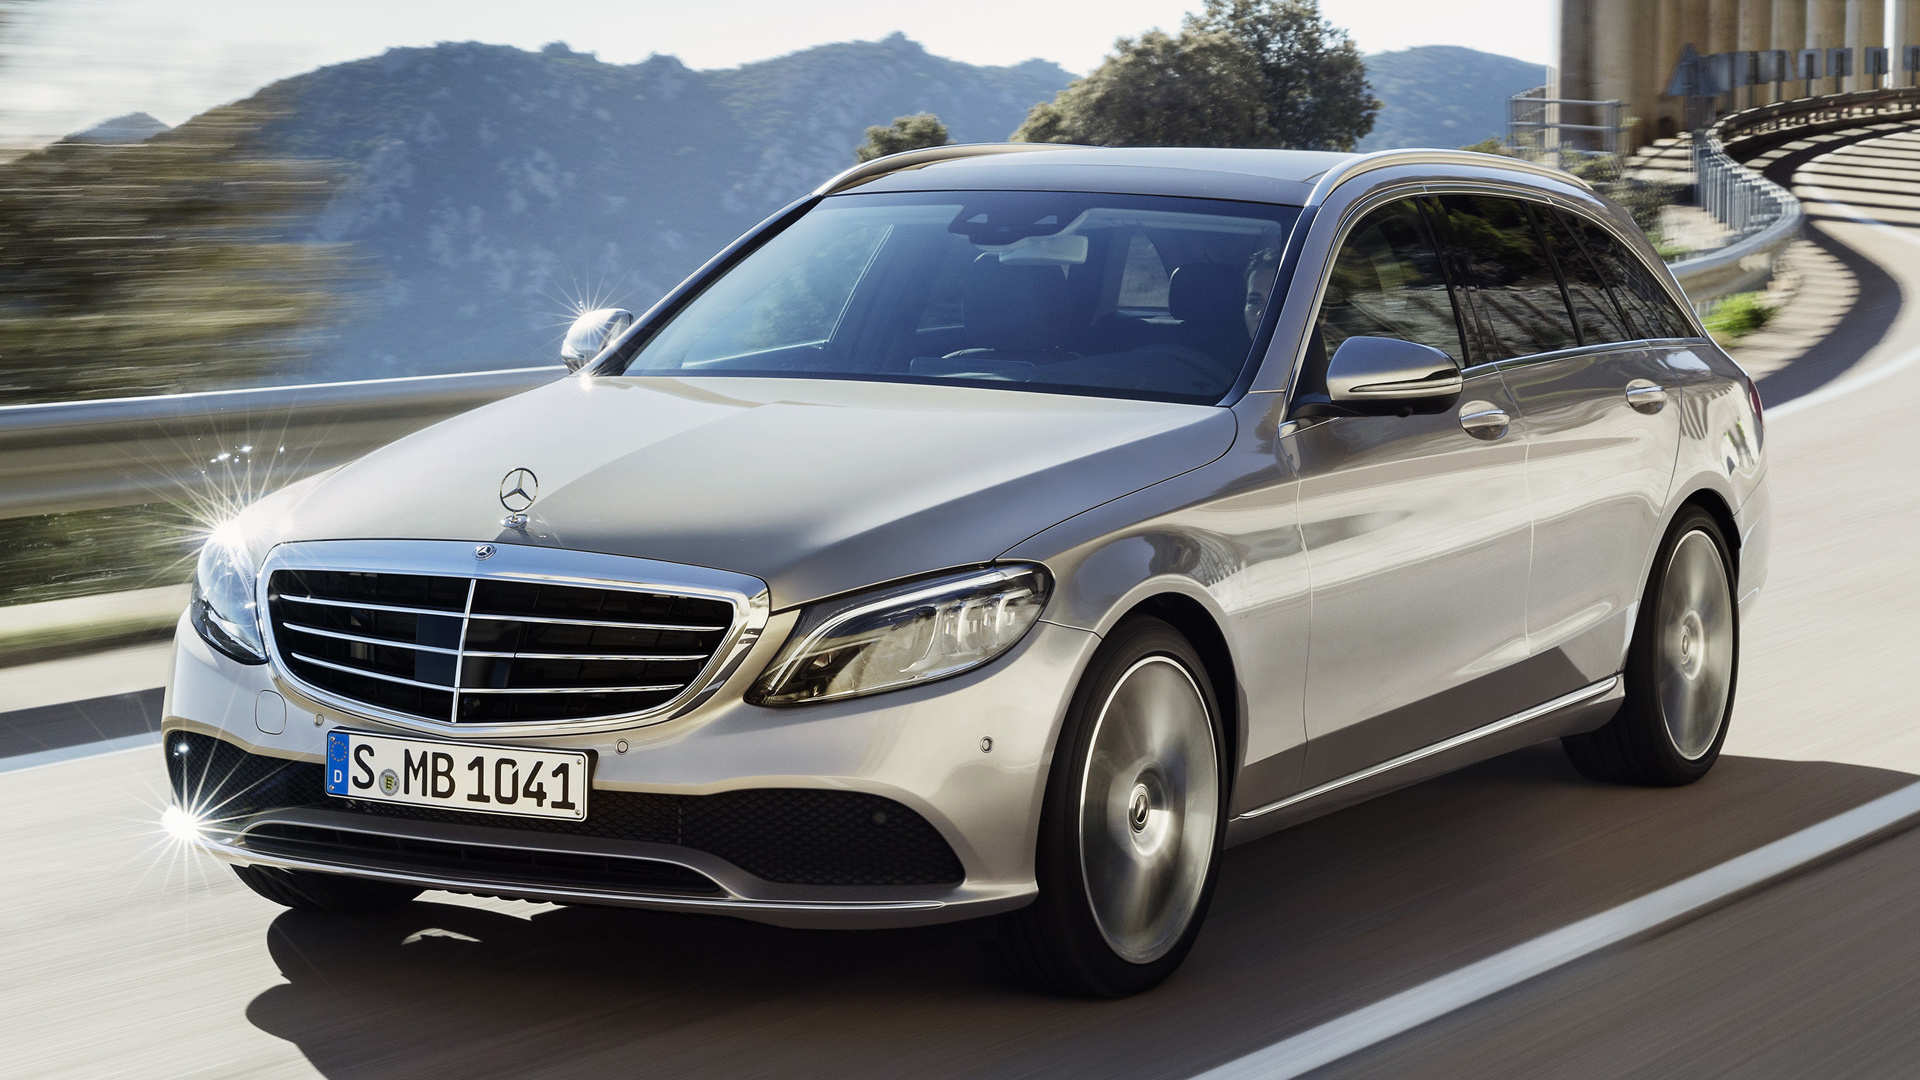 2018 Mercedes-Benz C-Class Estate with classic grille - Wallpapers and